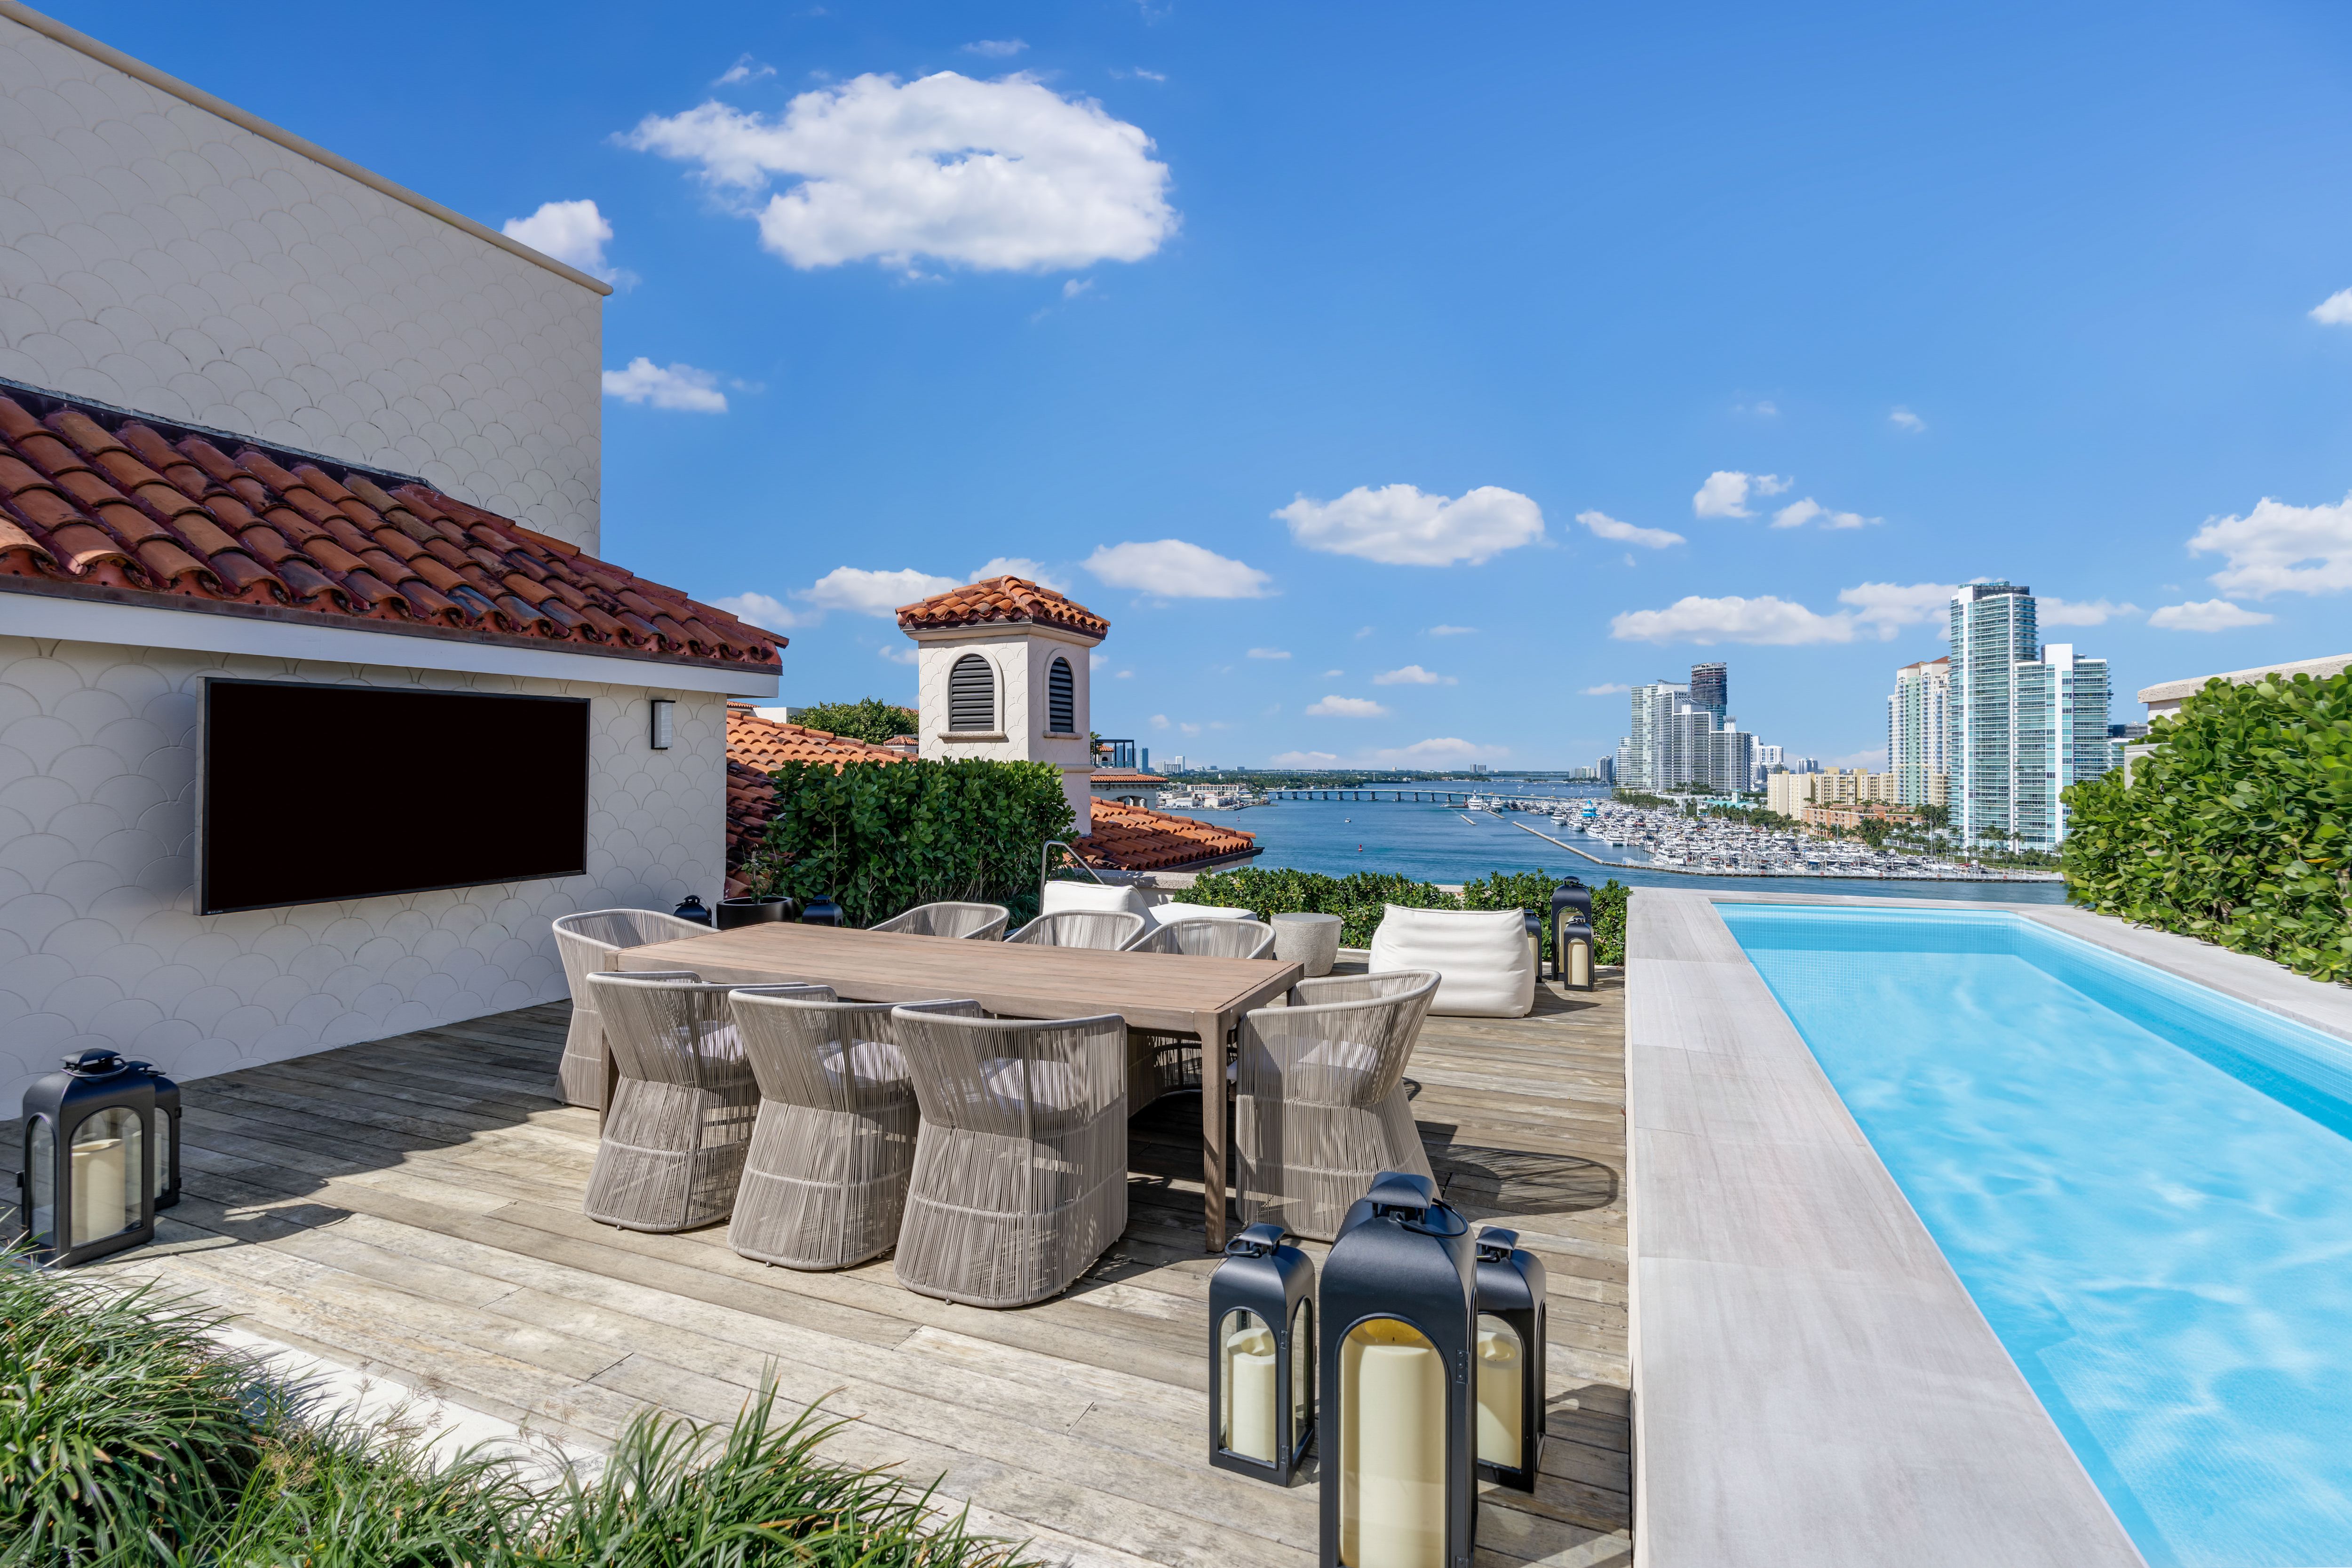 A rooftop pool and dining area at a Fisher Island condo.